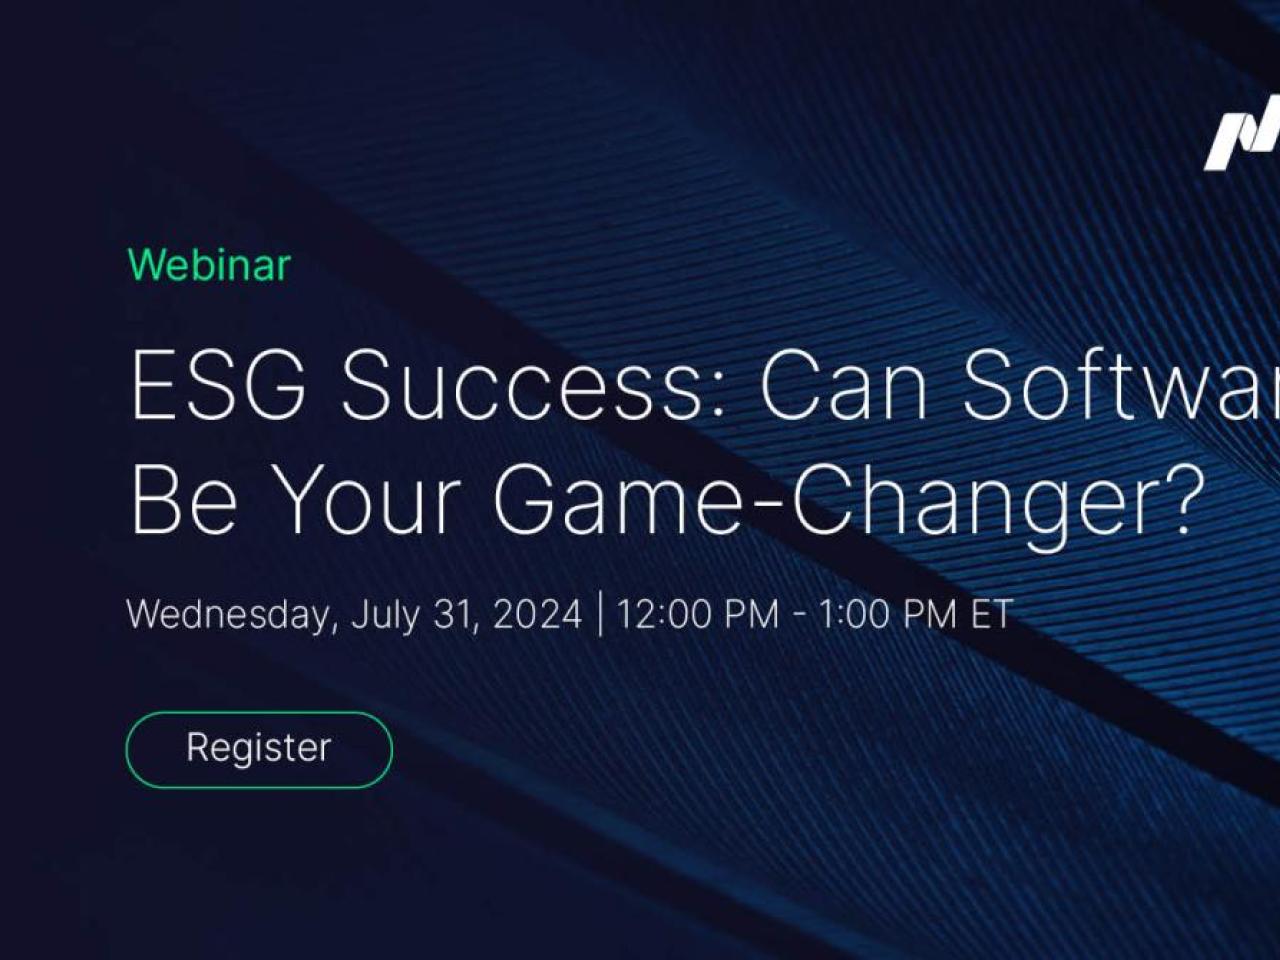 "Webinar ESG Success: Can Software Be Your Game-Changer? Wednesday, July 31, 2024 | 12:00 PM - 1:00 PM ET"